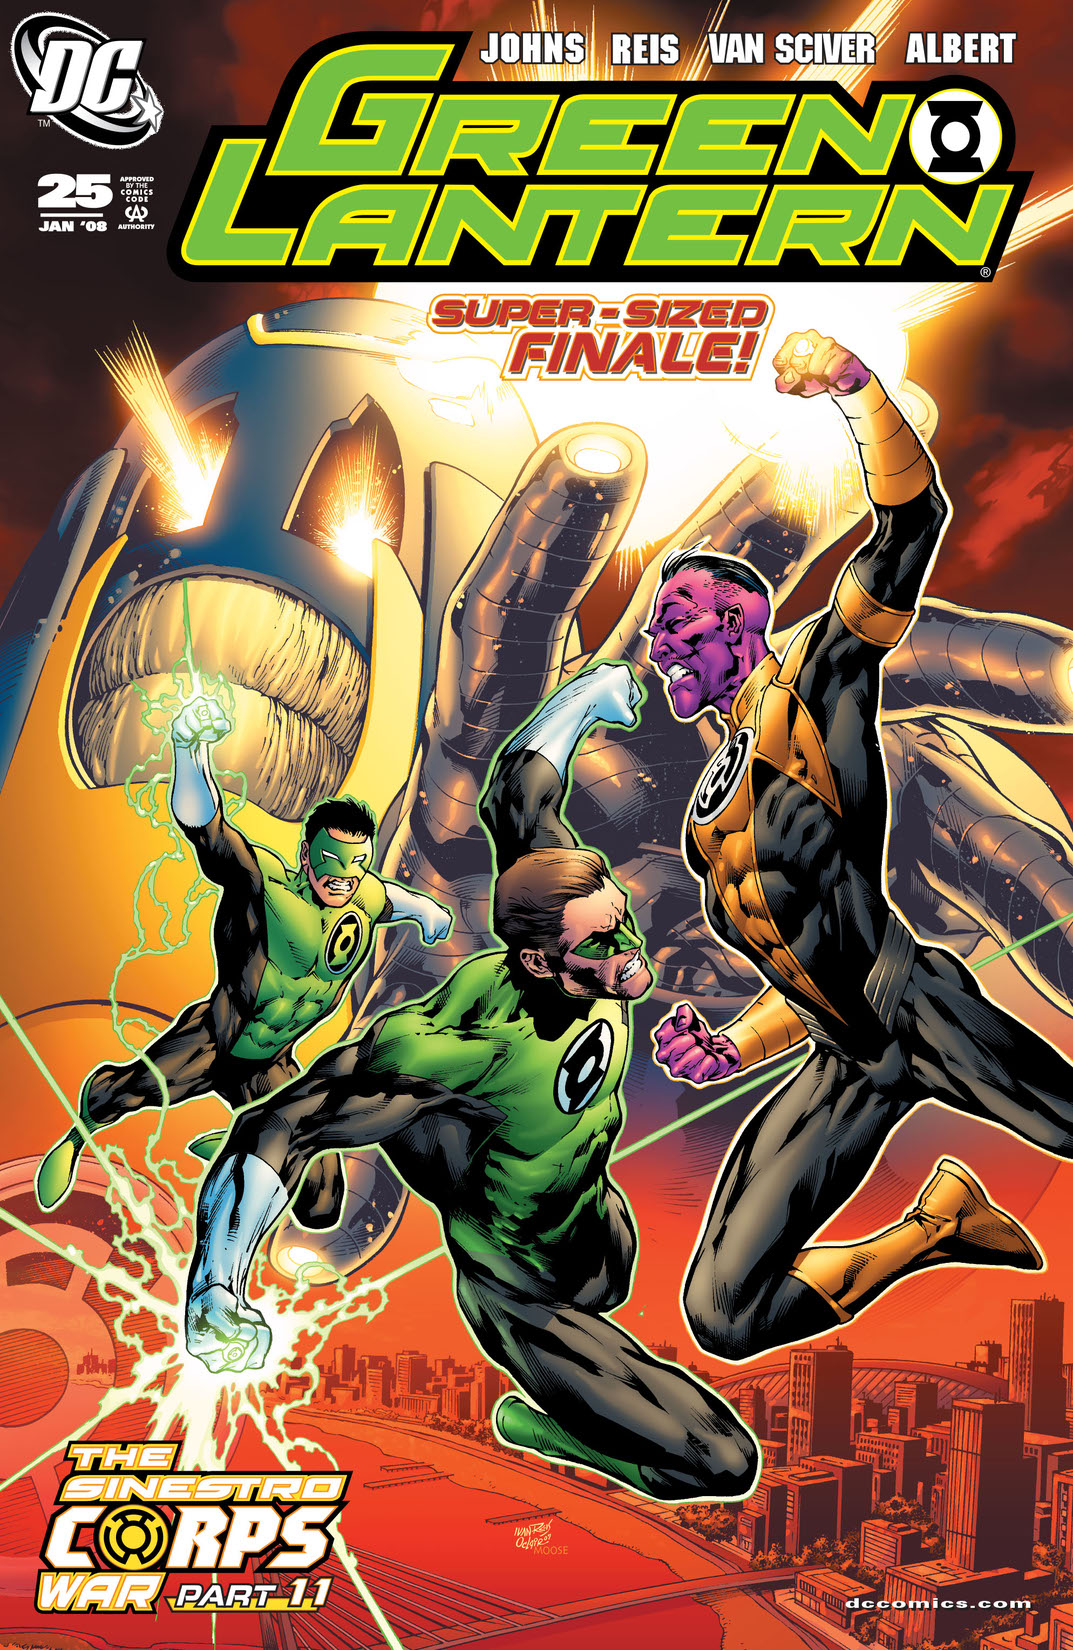 Green Lantern (2007-) #25 preview images